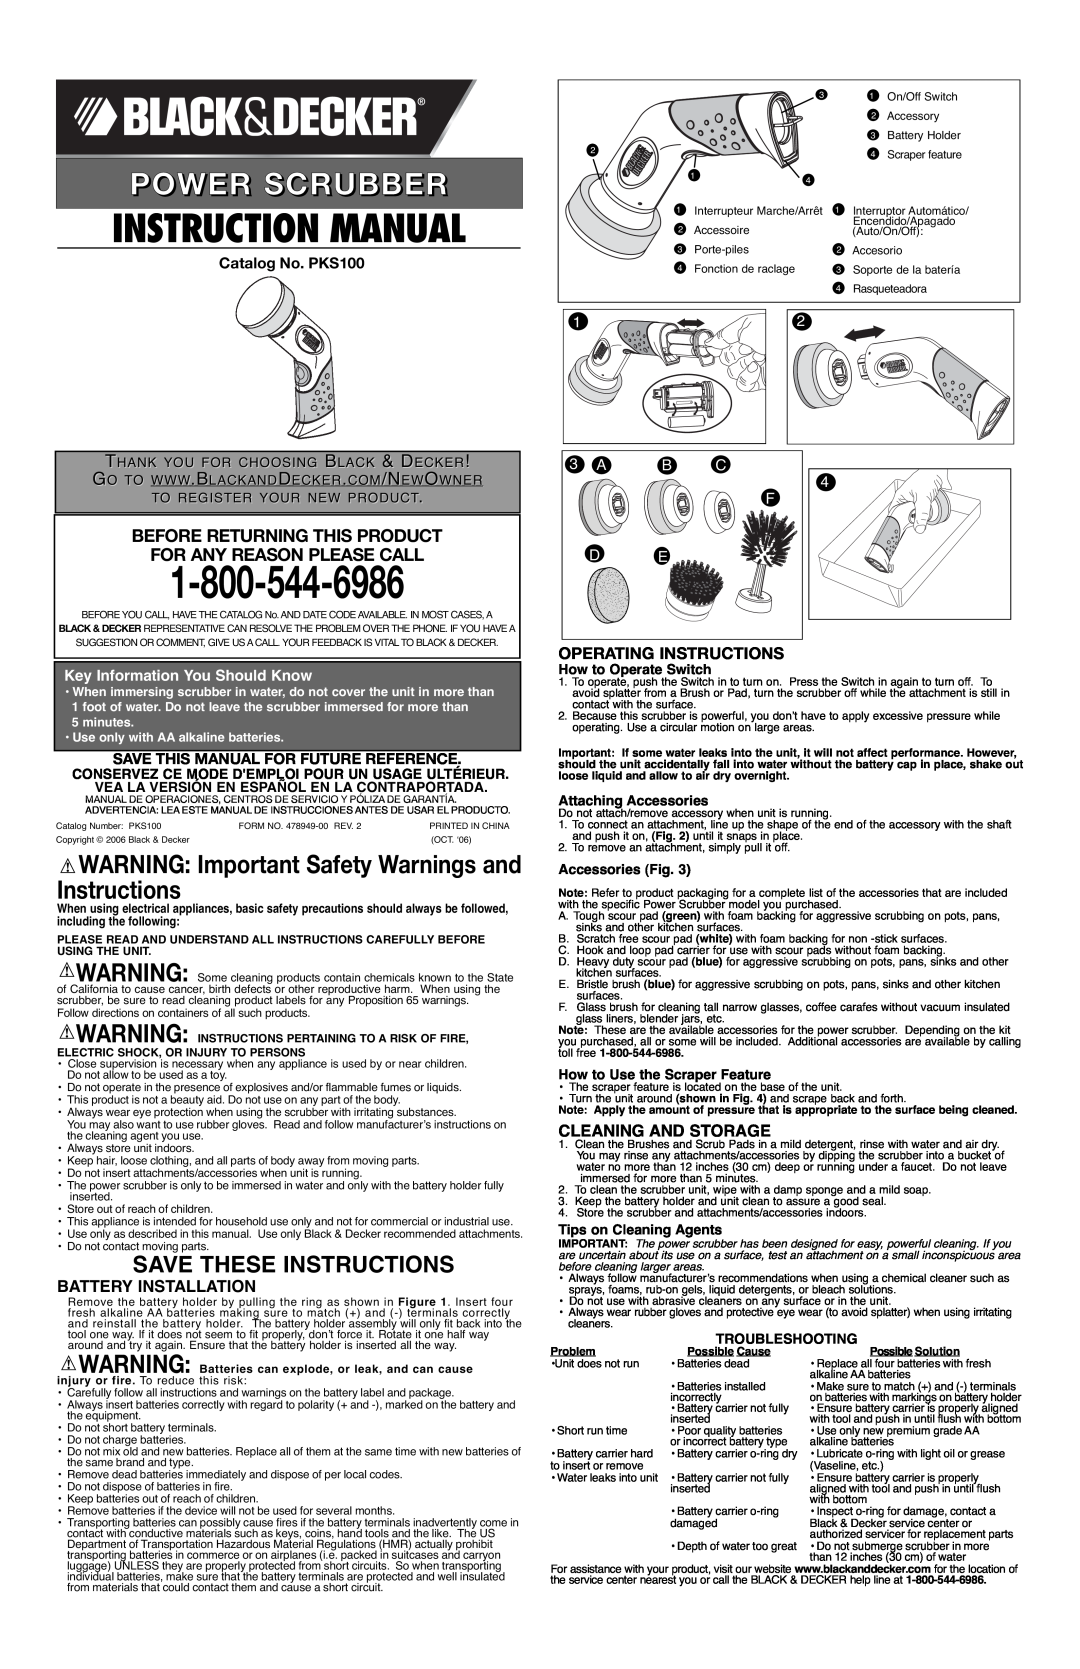 Black & Decker PKS160 instruction manual WARNING Important Safety Warnings and Instructions, Save These Instructions 